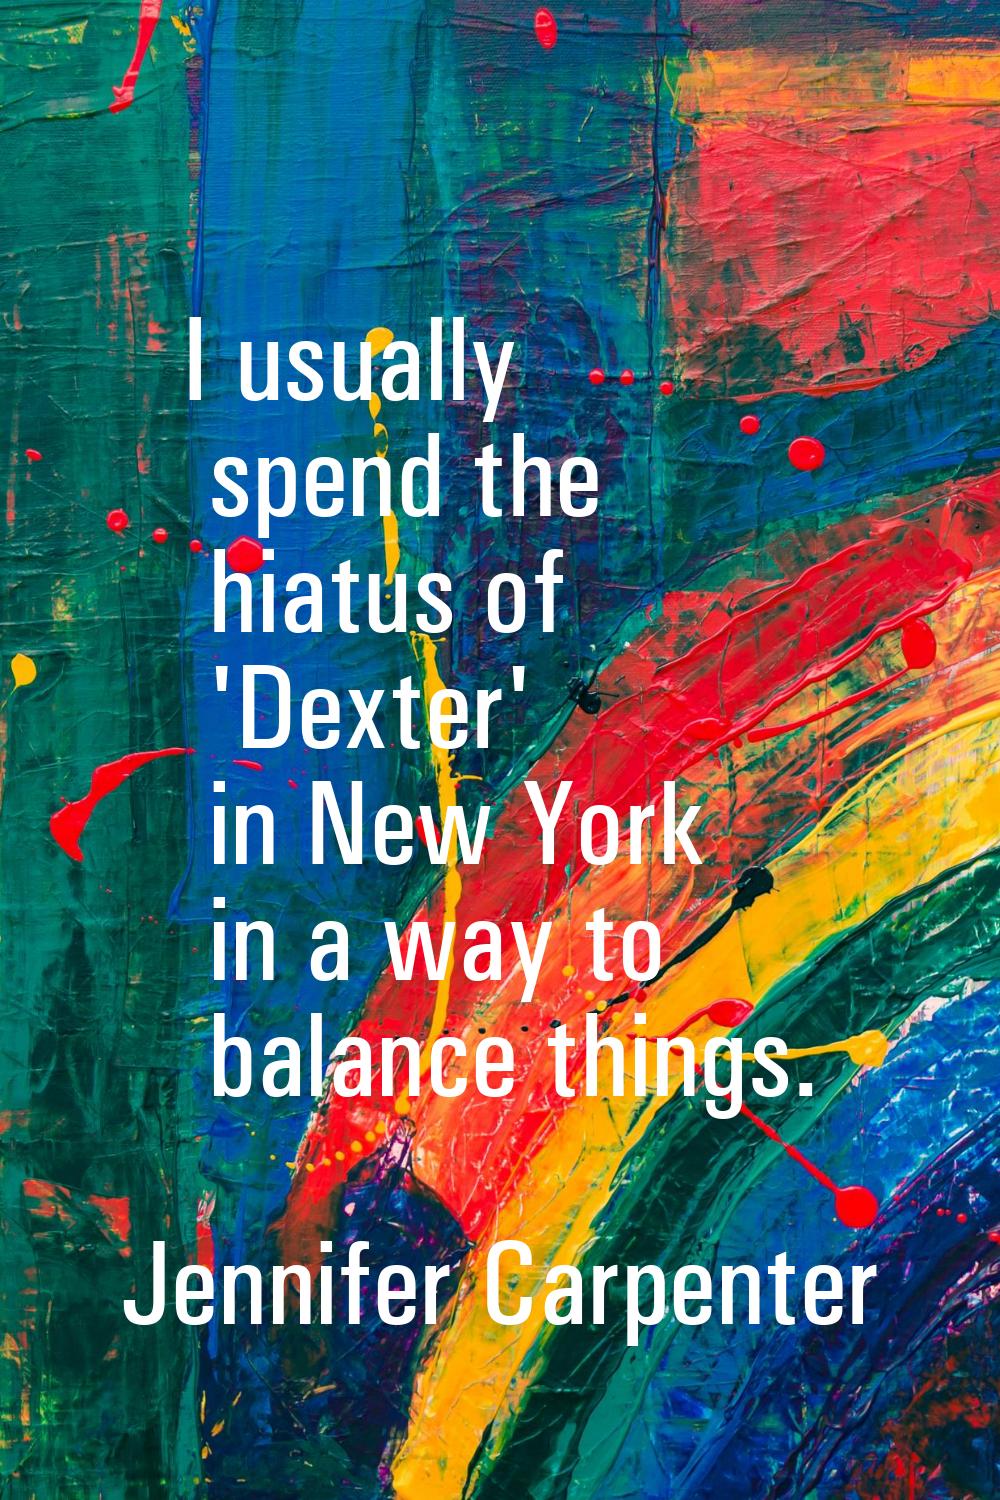 I usually spend the hiatus of 'Dexter' in New York in a way to balance things.